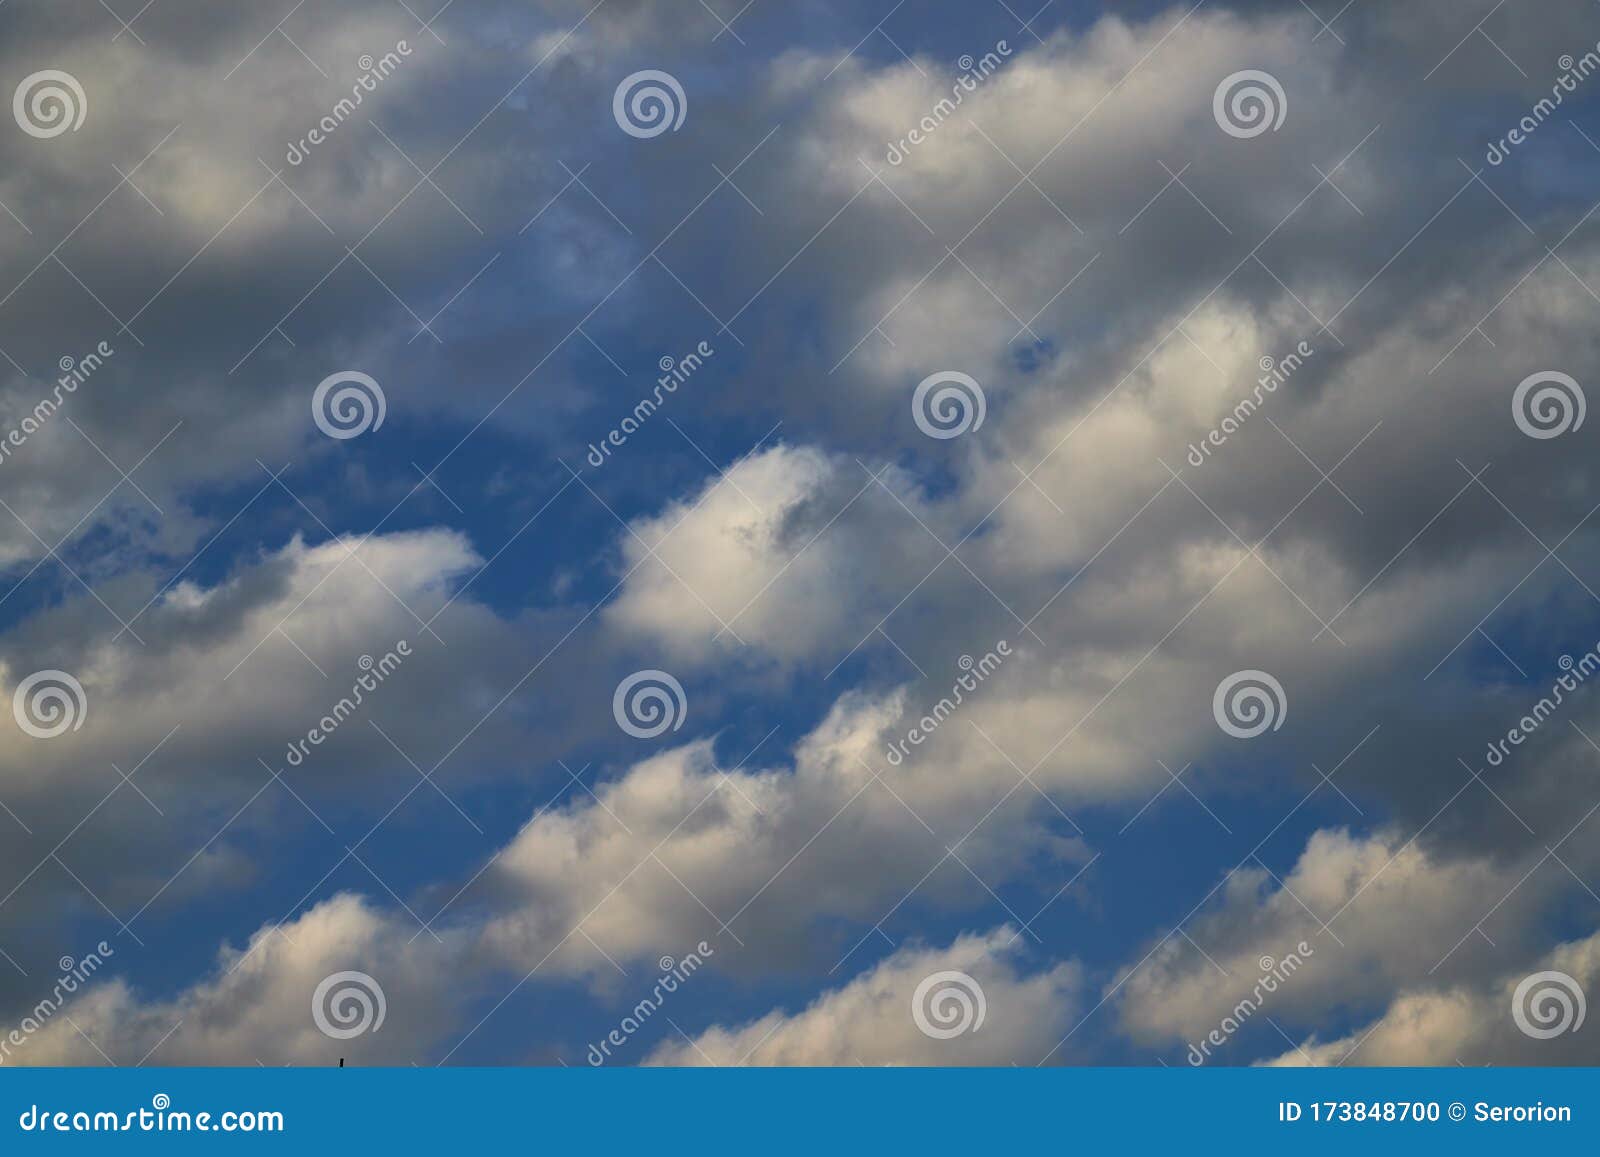 beautiful, spring clouds in the blue sky